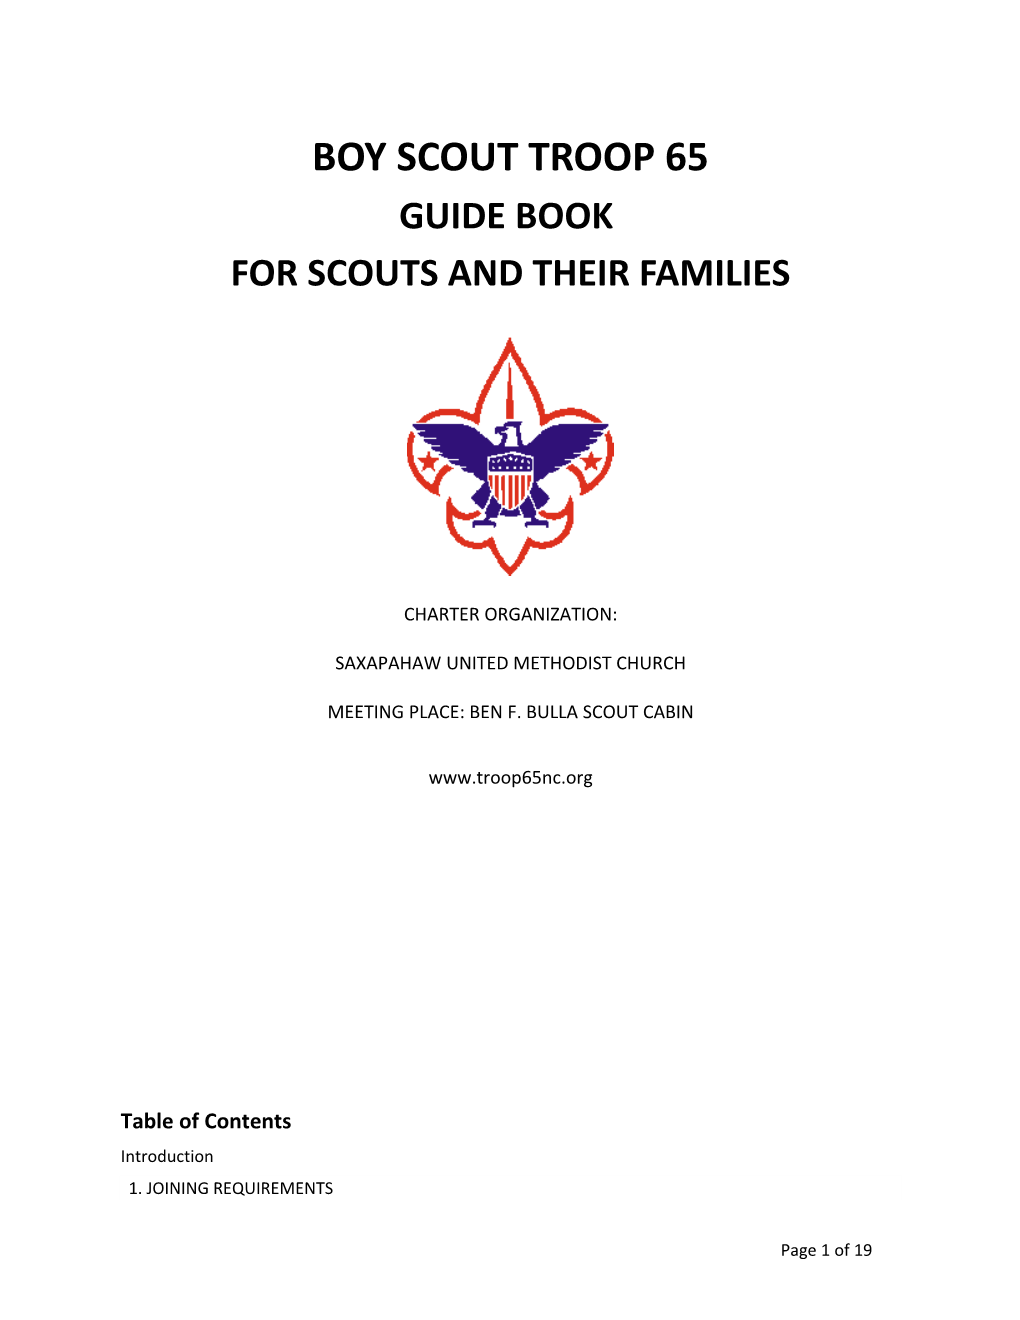 For Scoutsand Their Families